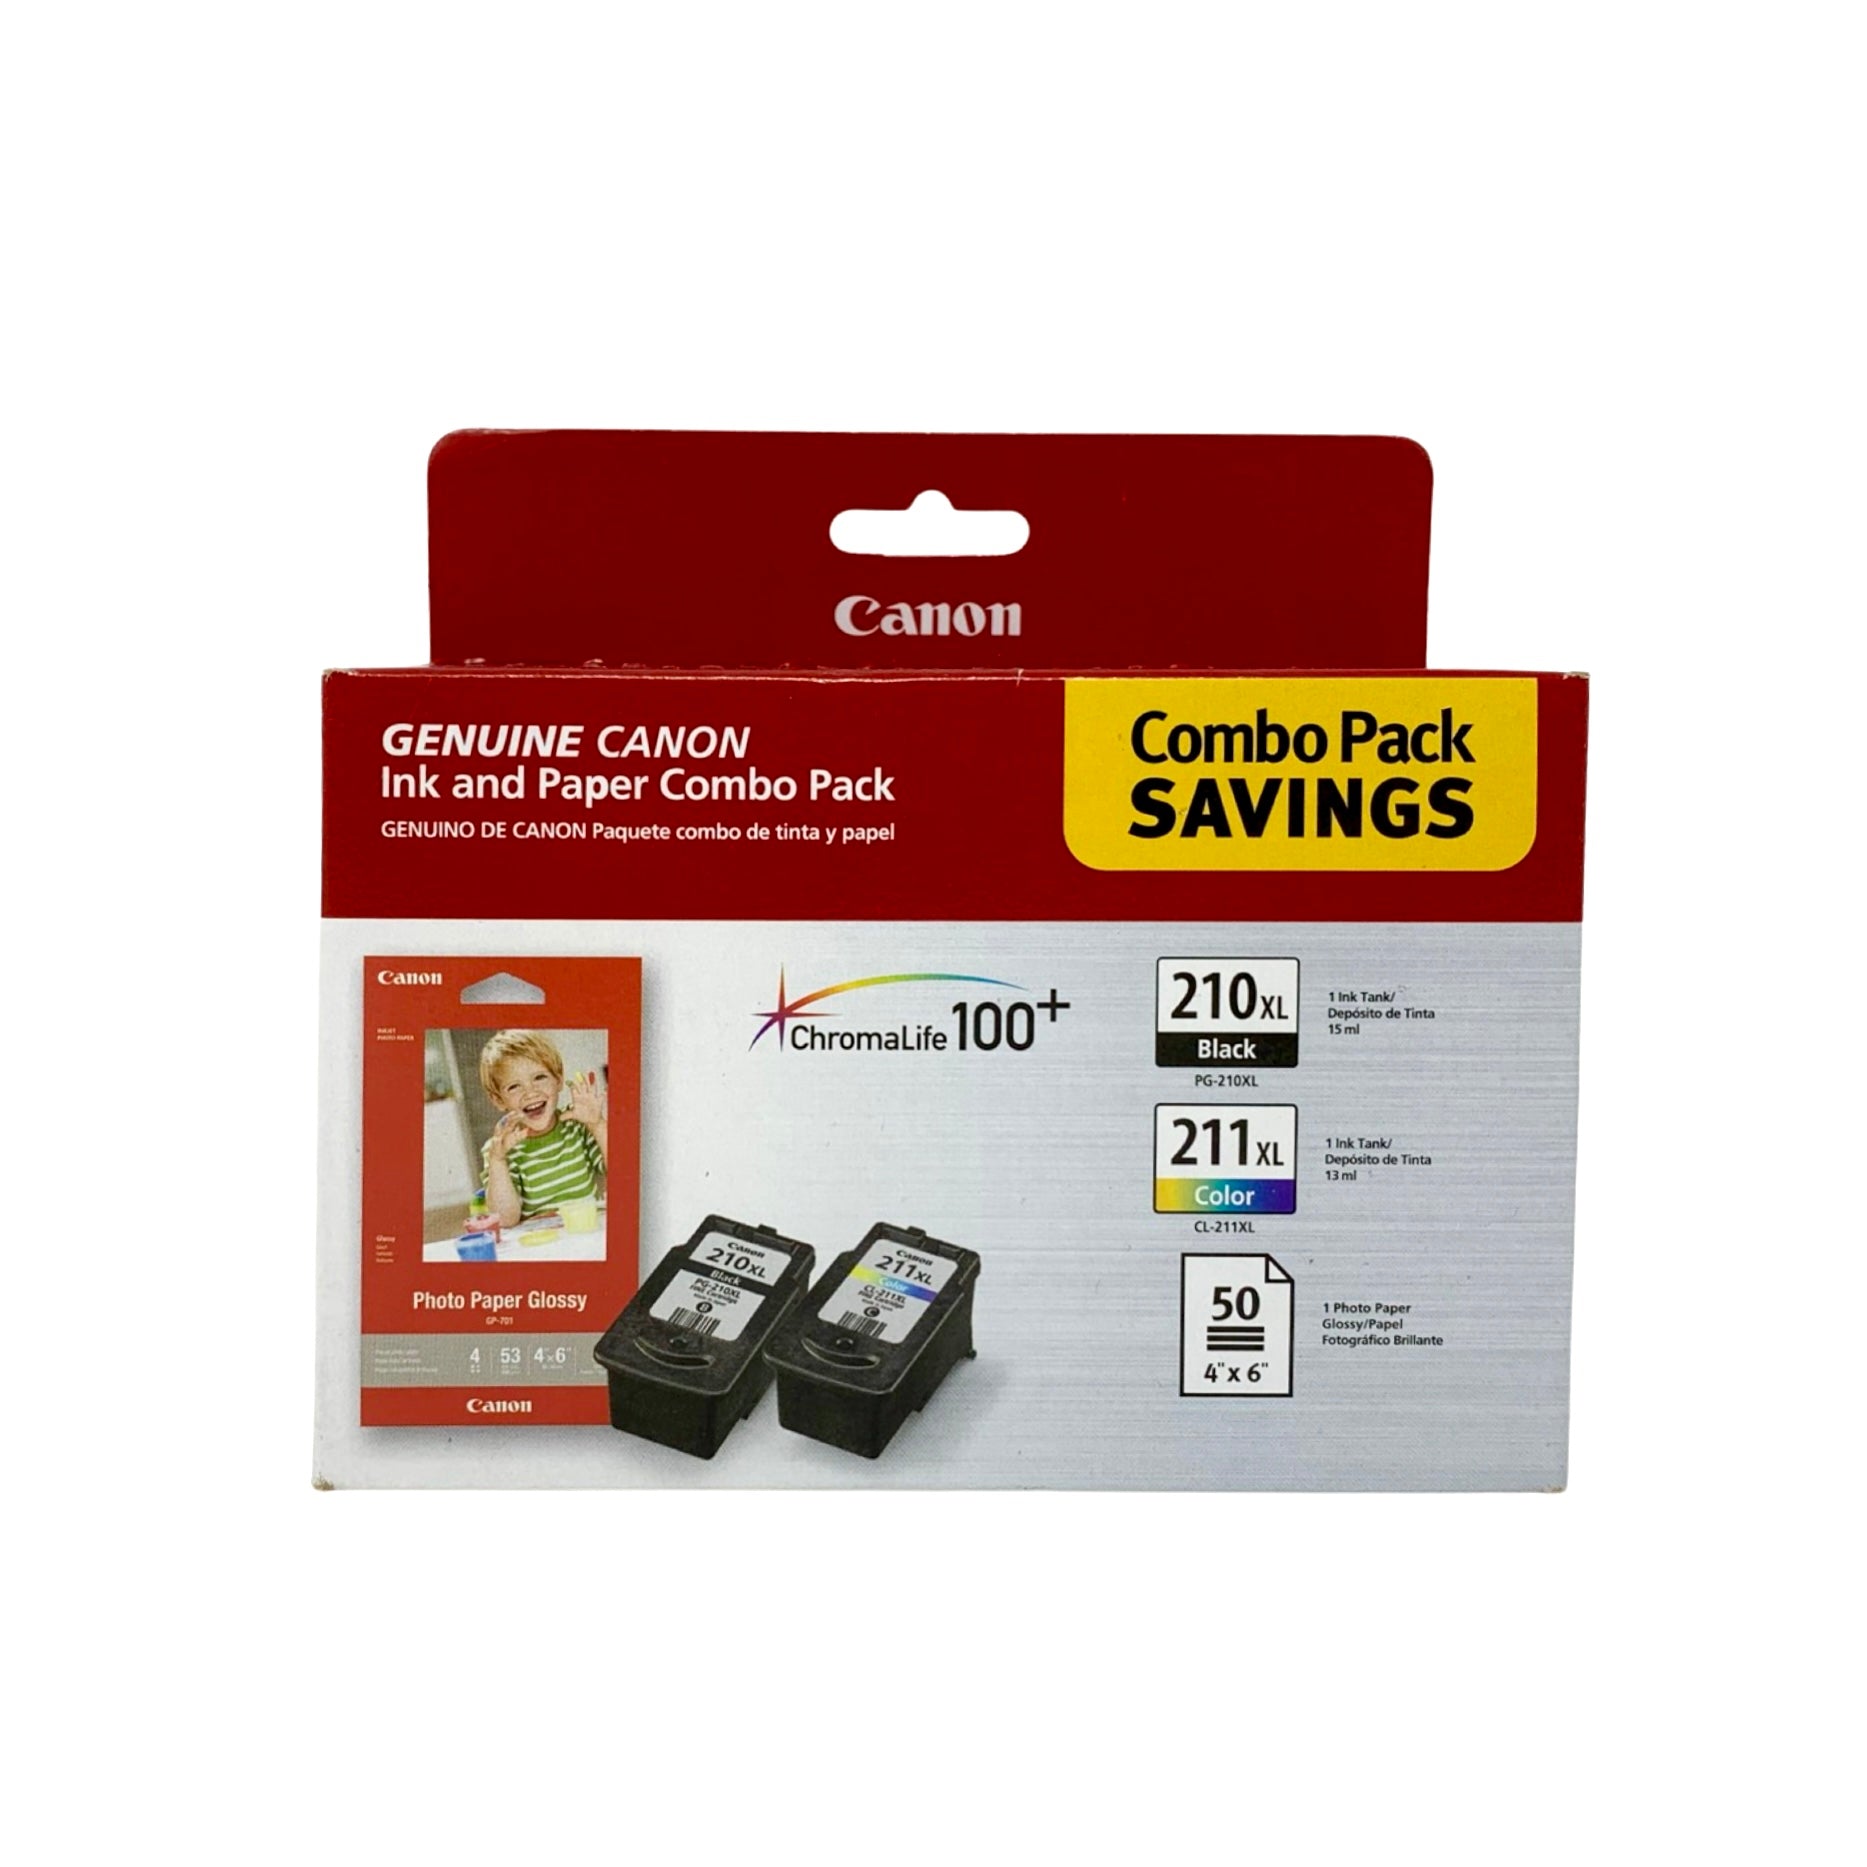 Genuine Canon PG-210XL Black and CL-211XL Color Ink Cartridges, 2-Pack with Glossy Paper